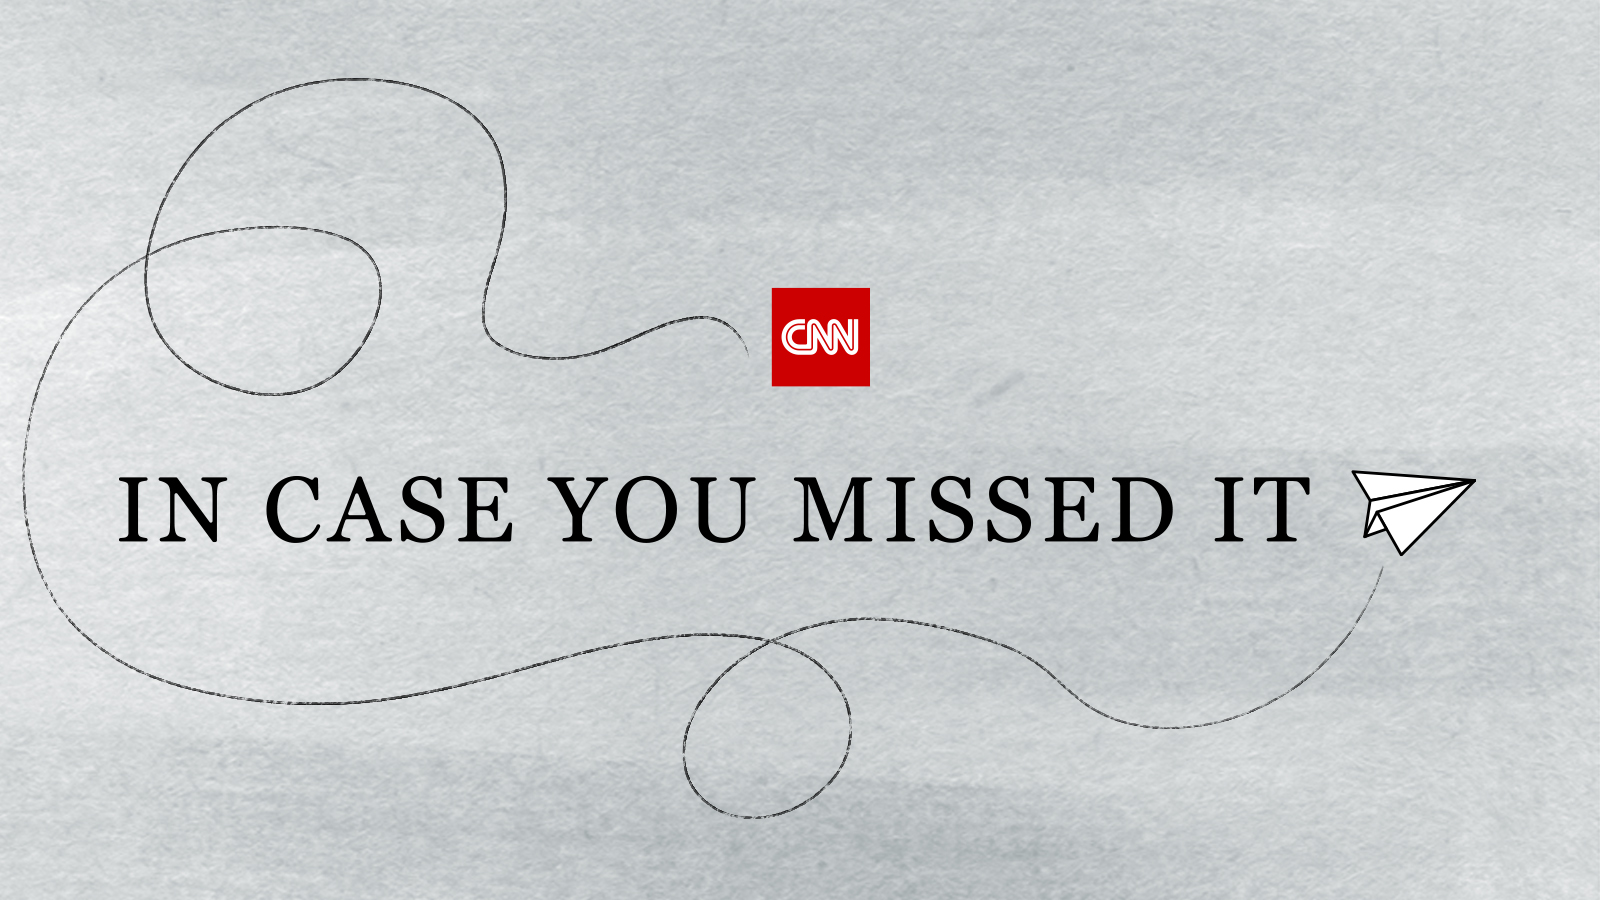 CNN's In Case You Missed It newsletter